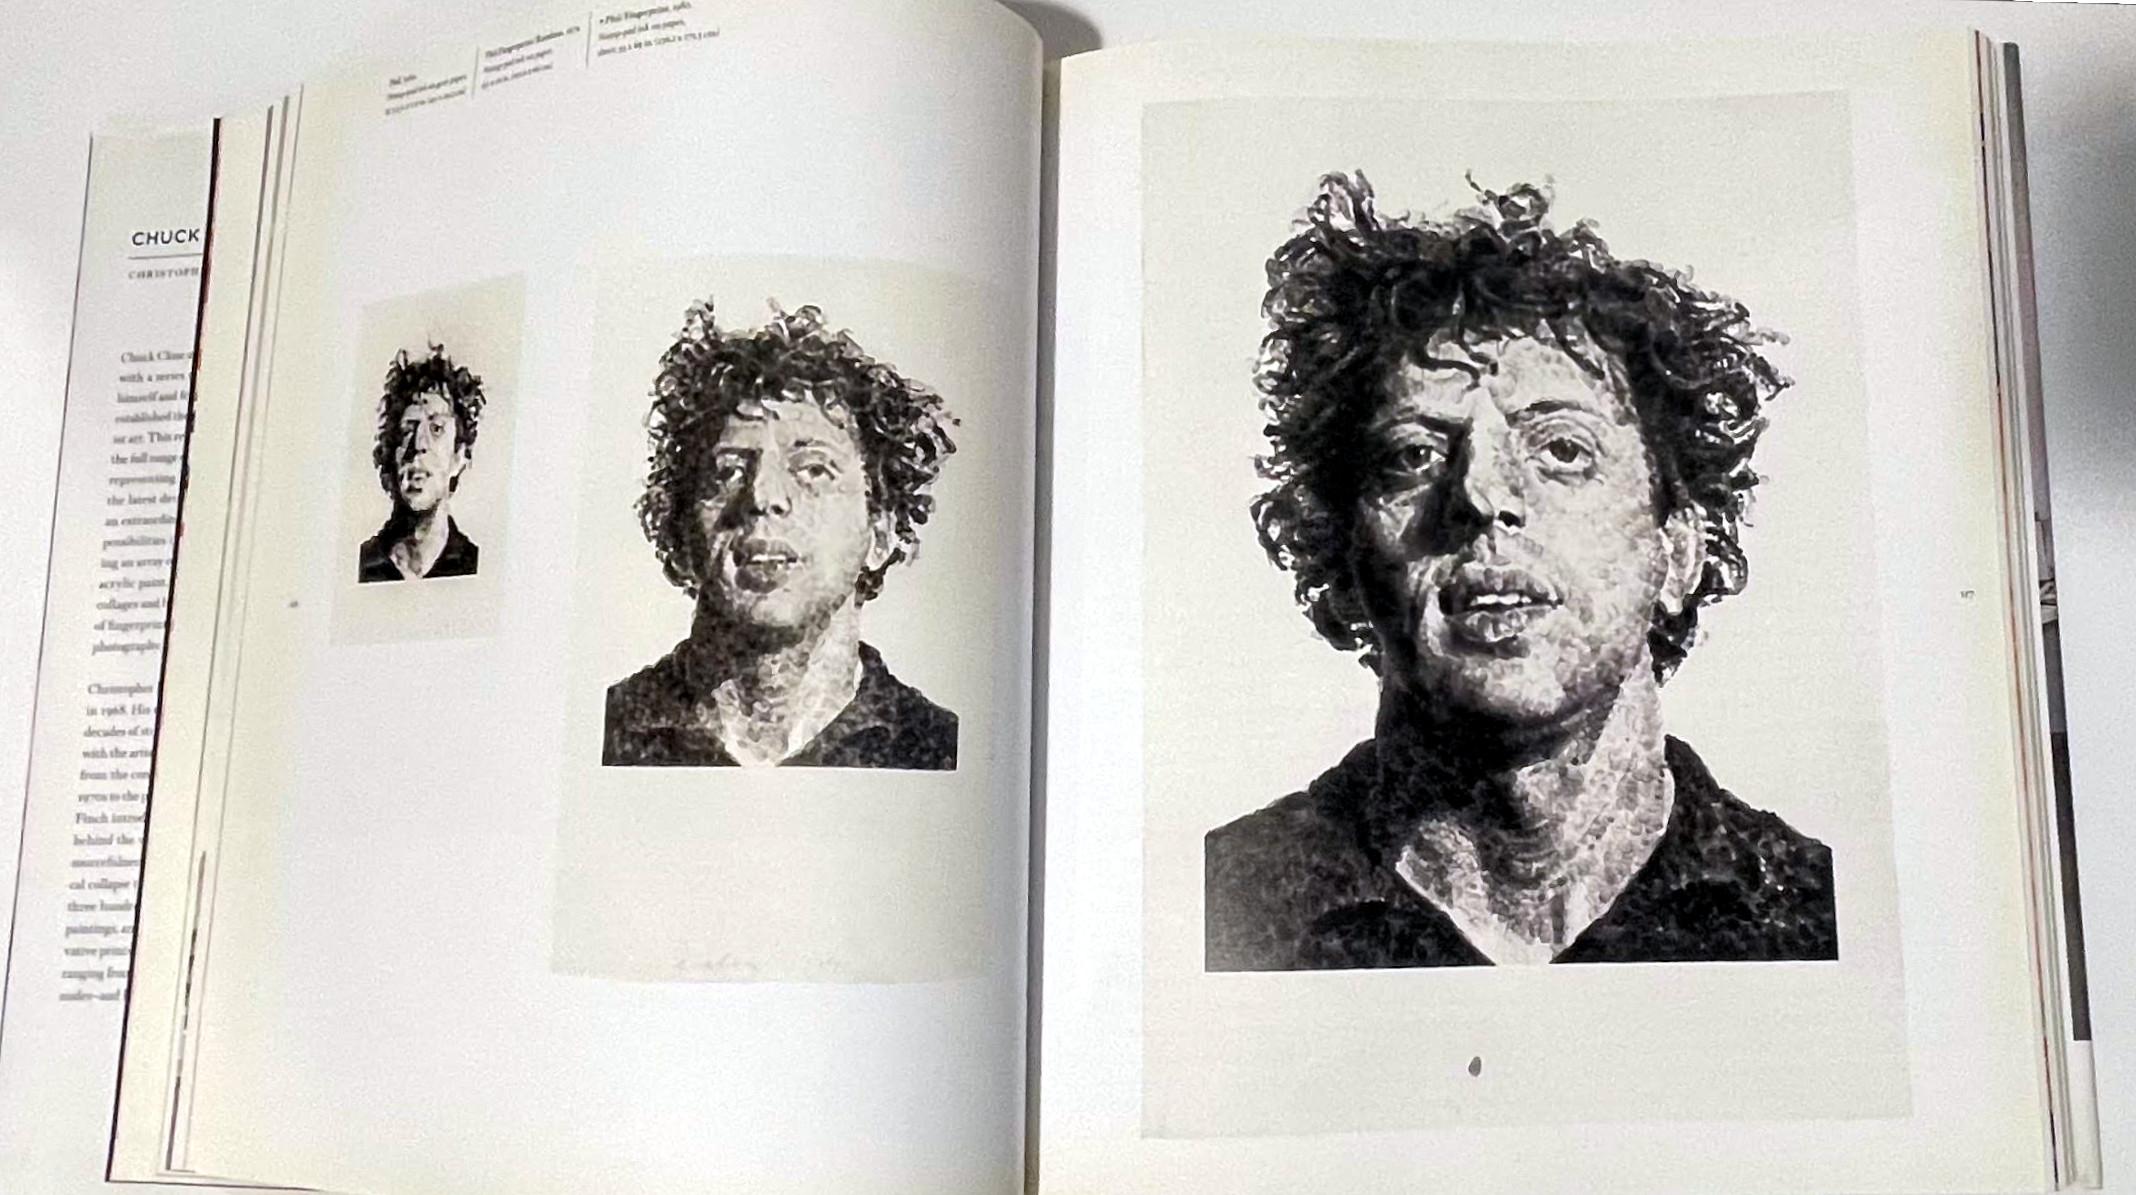 Book: CHUCK CLOSE WORK (hand signed by both Chuck Close and Christopher Finch) For Sale 12